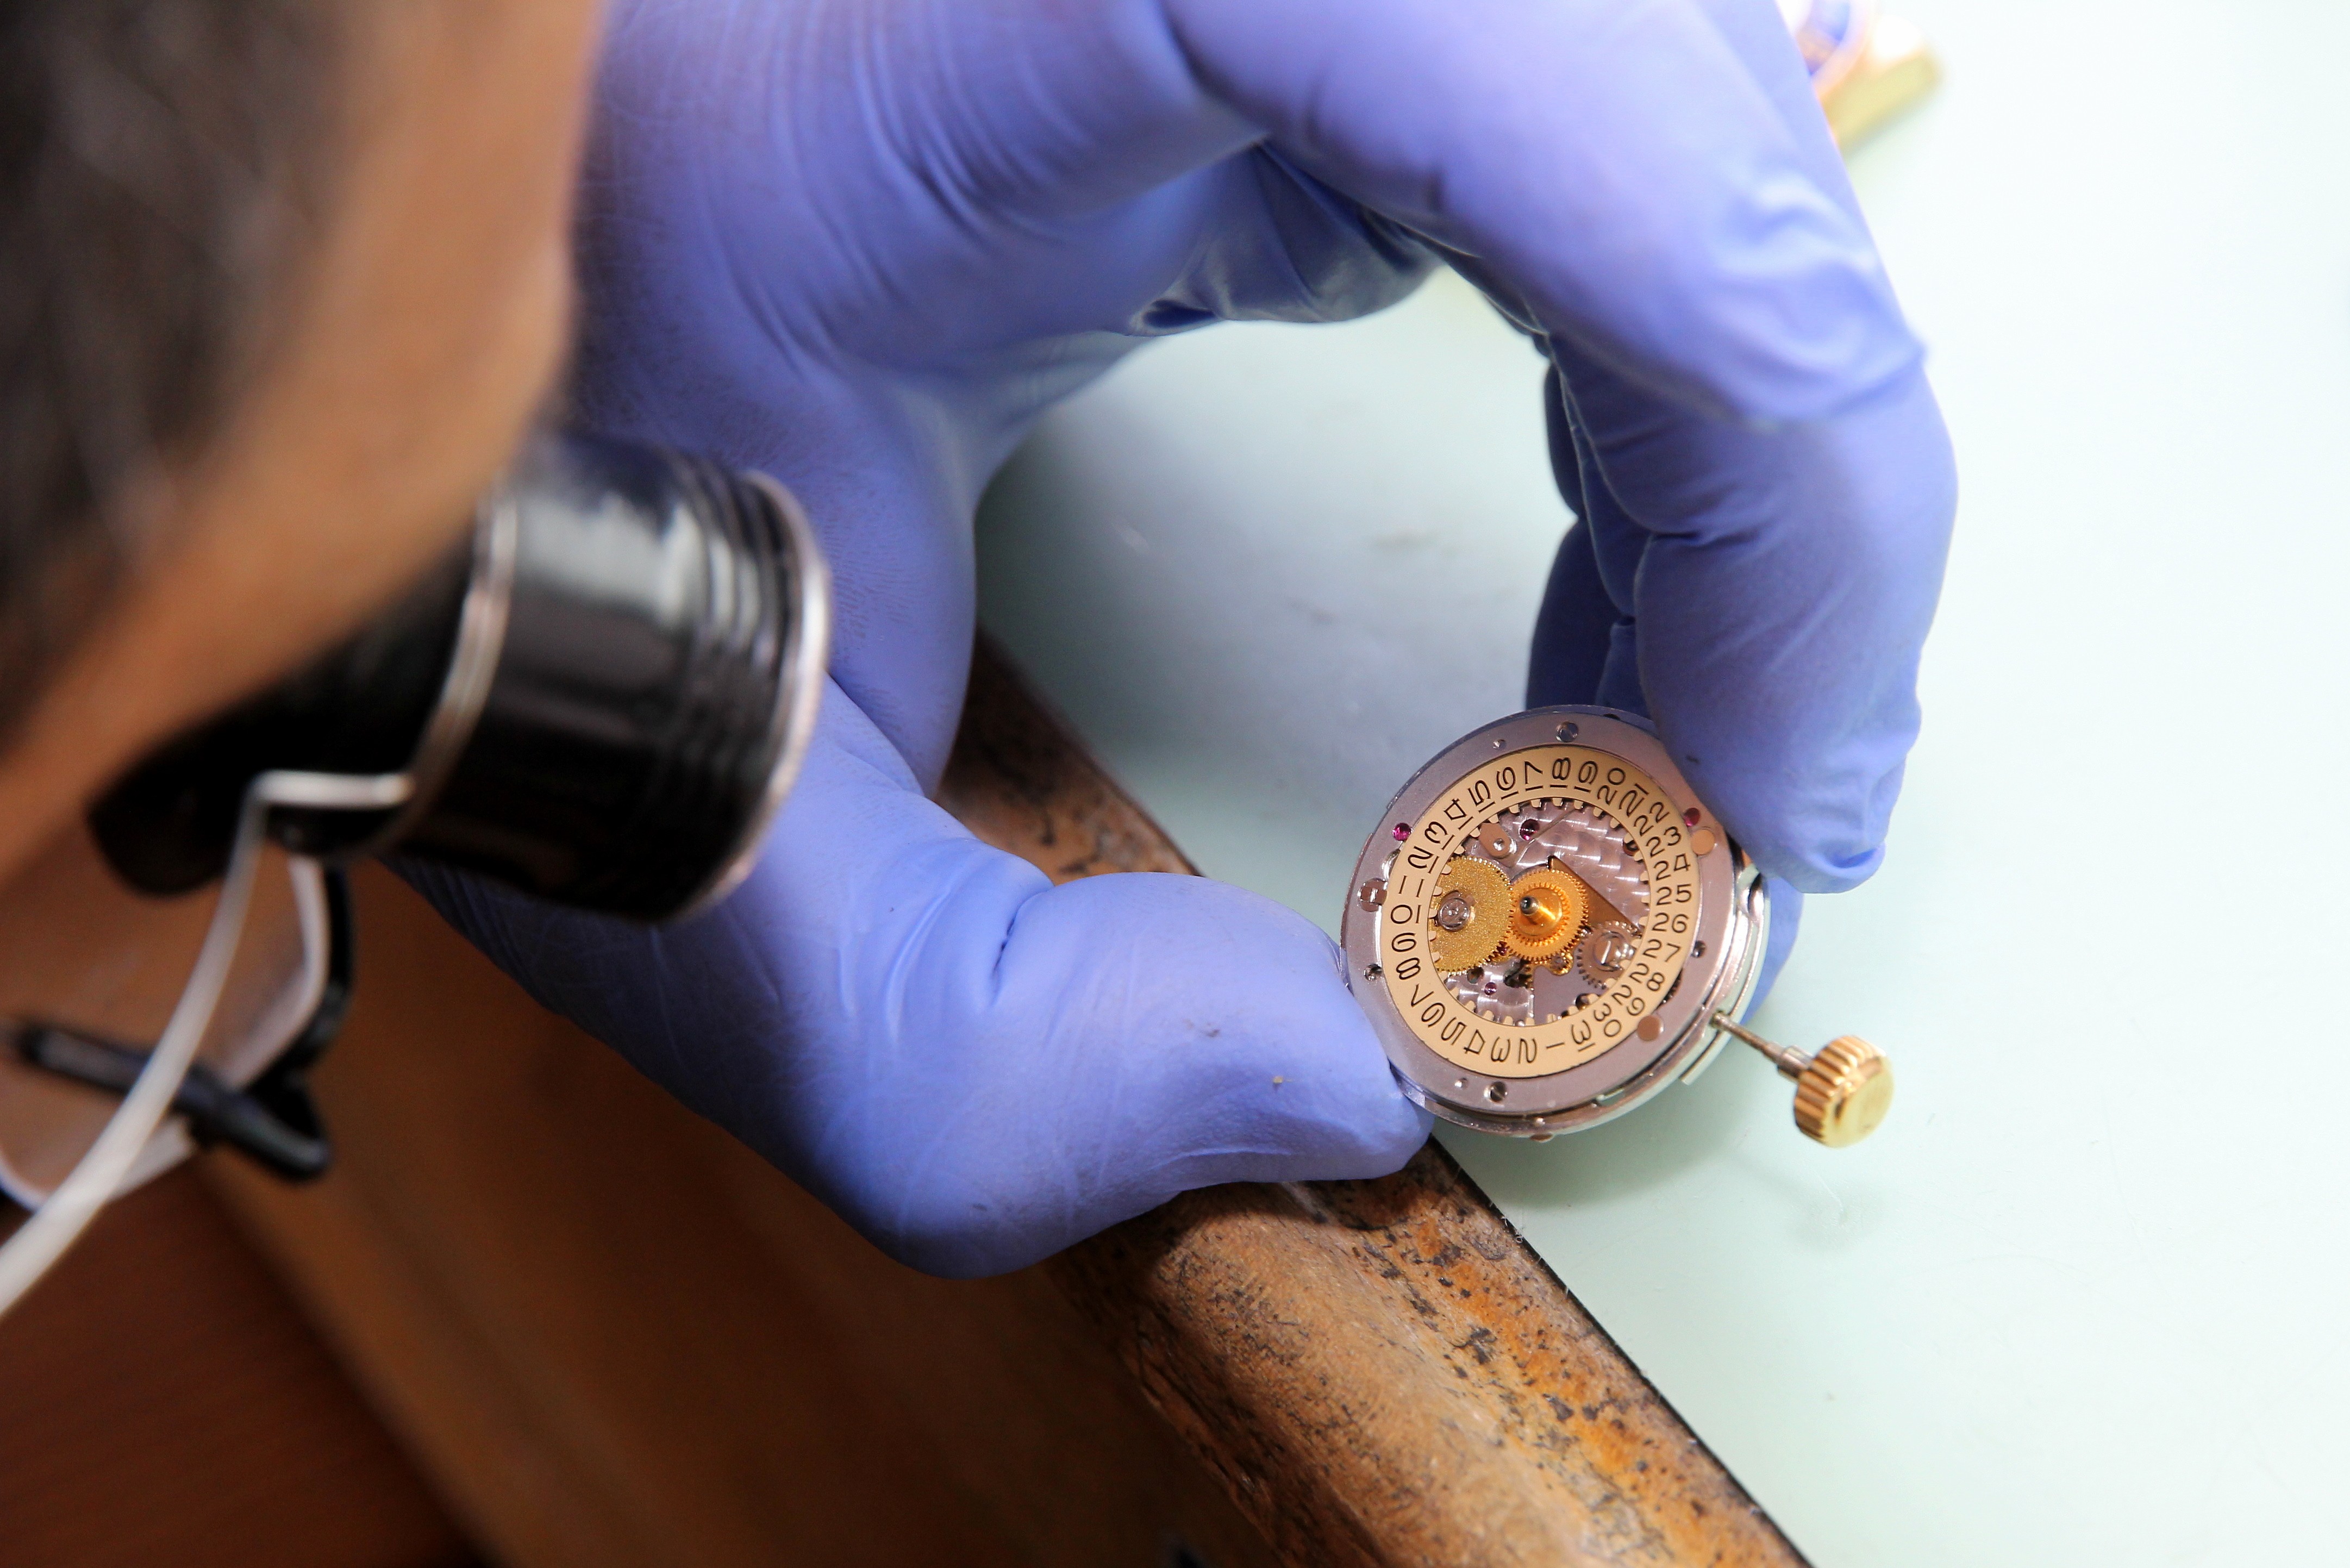 Keeping Time: Expert Watch Repair And Maintenance At Jewelry-N-Loan